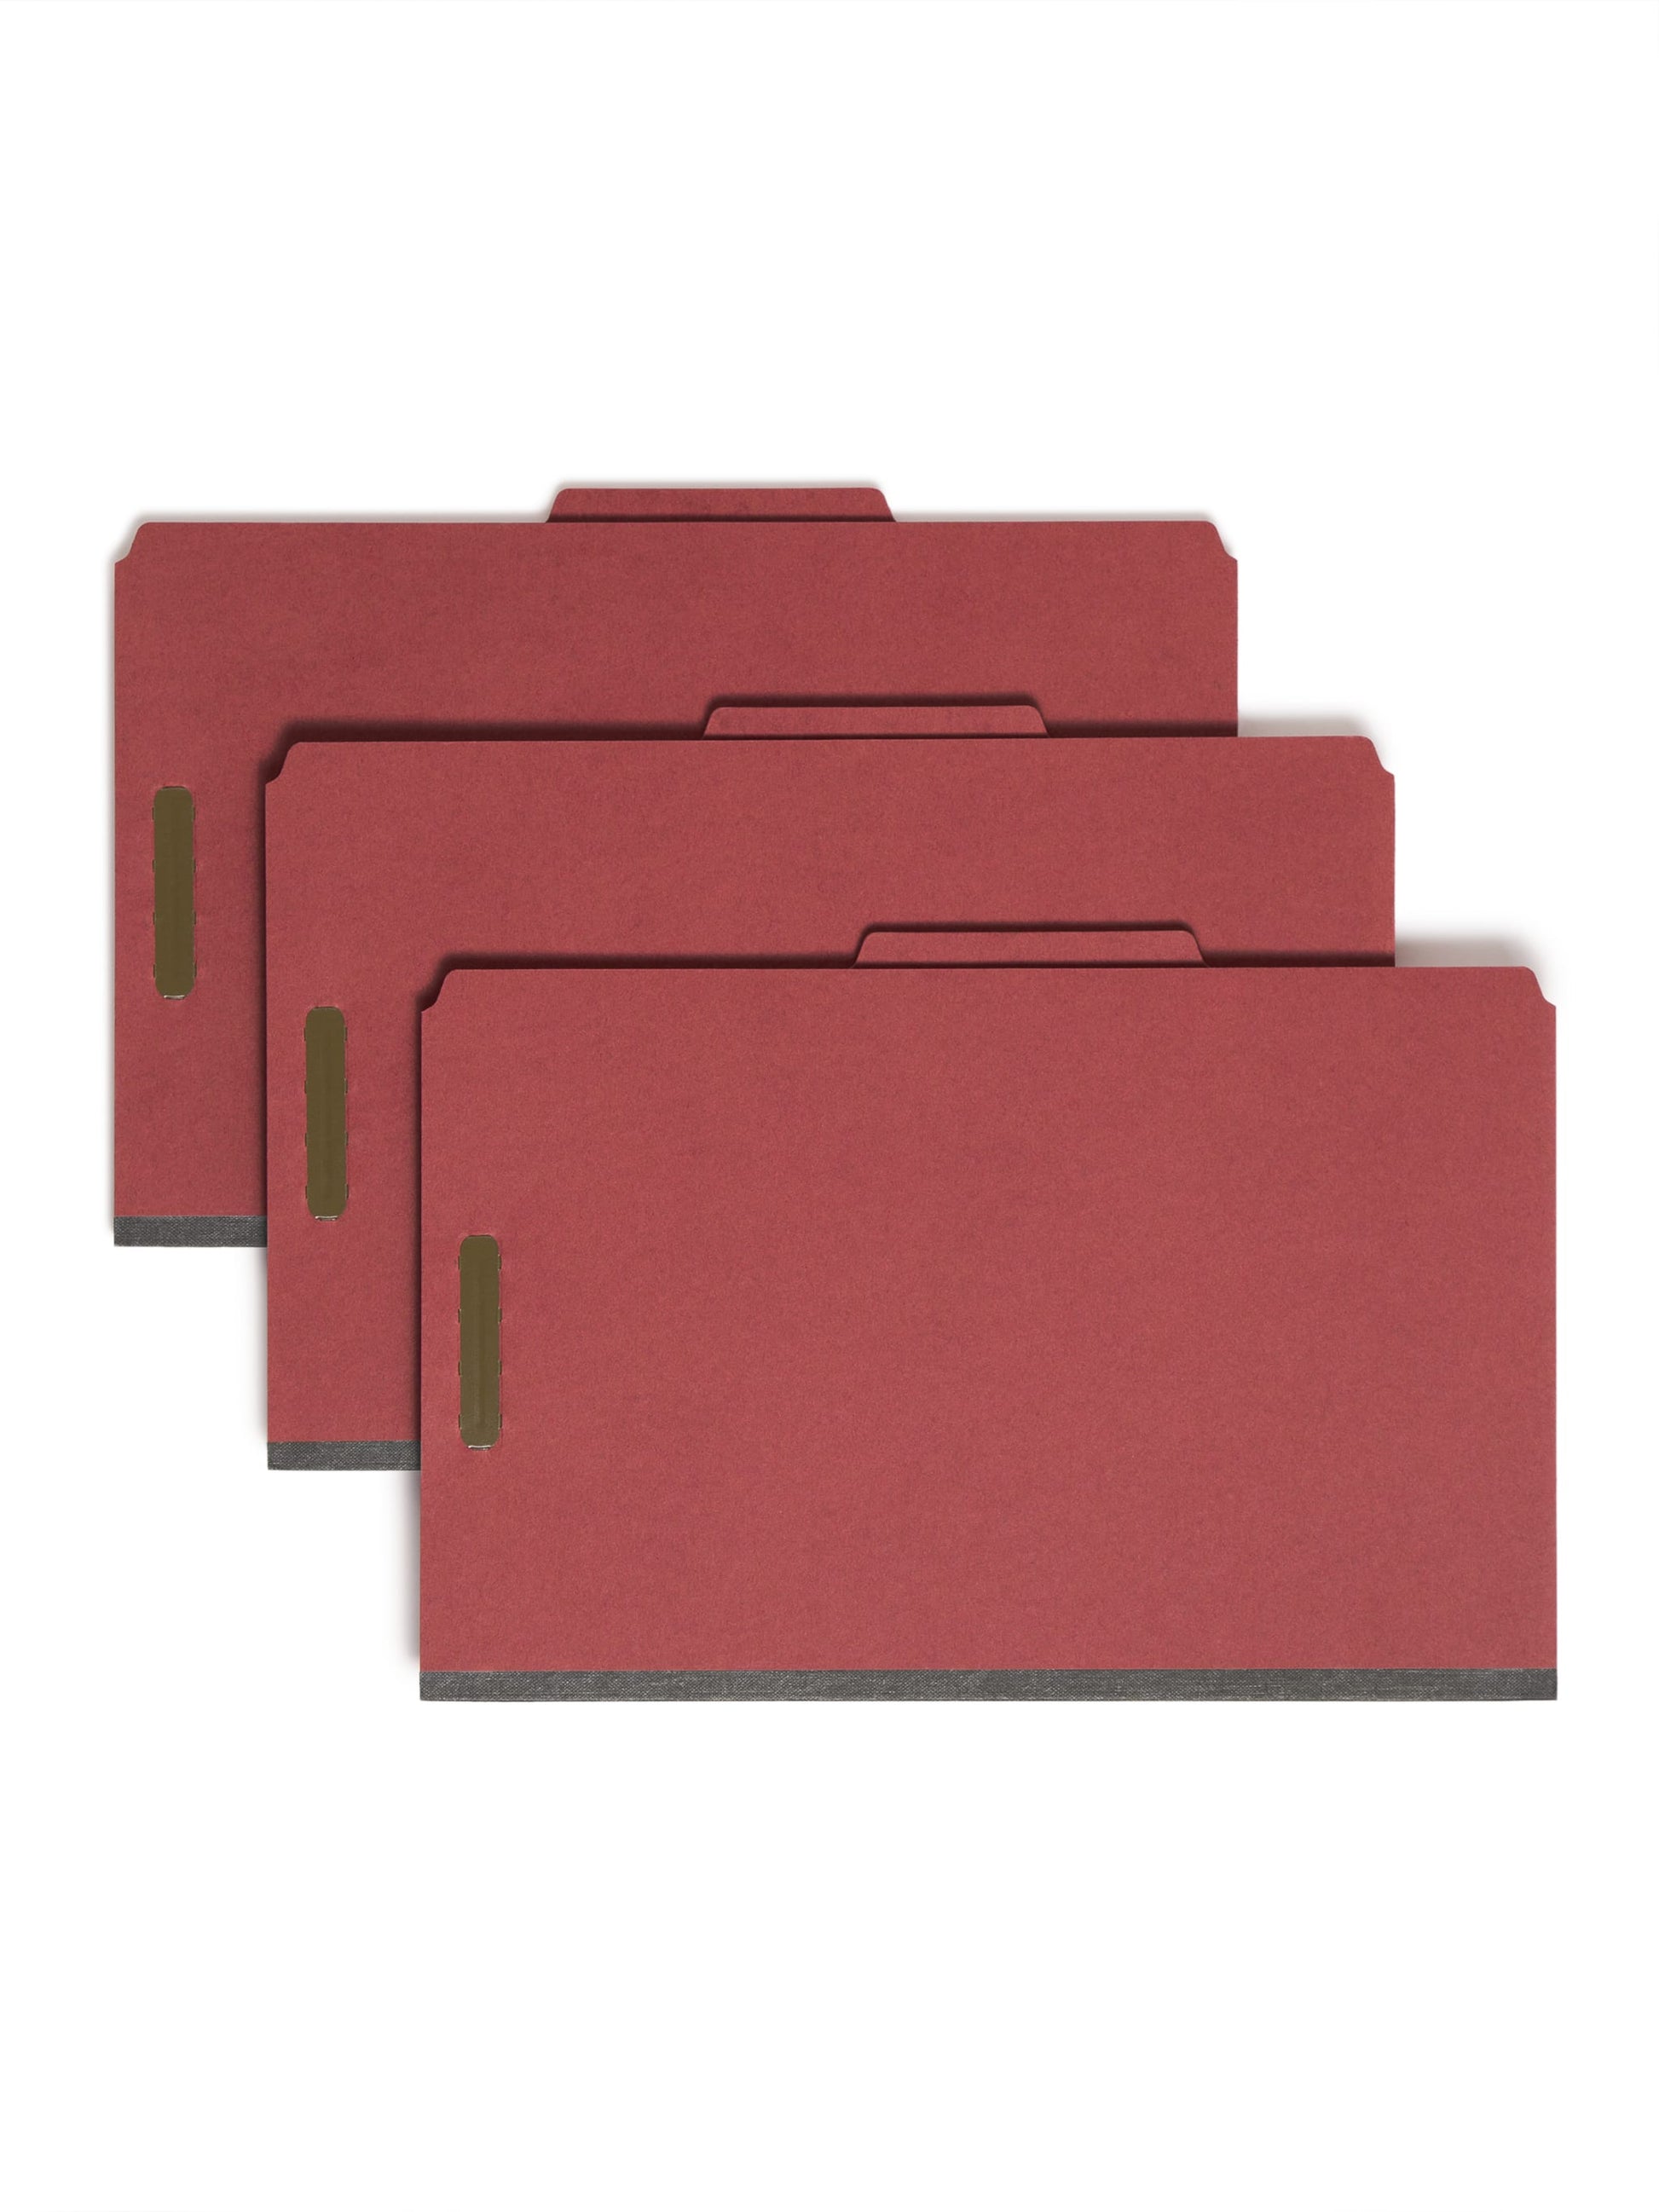 100% Recycled Value Pressboard Classification Folders, 2 Dividers, 2 inch Expansion, 2/5-Cut Tab, 2 Fasteners, Red Color, Legal Size, Set of 0, 30086486211896